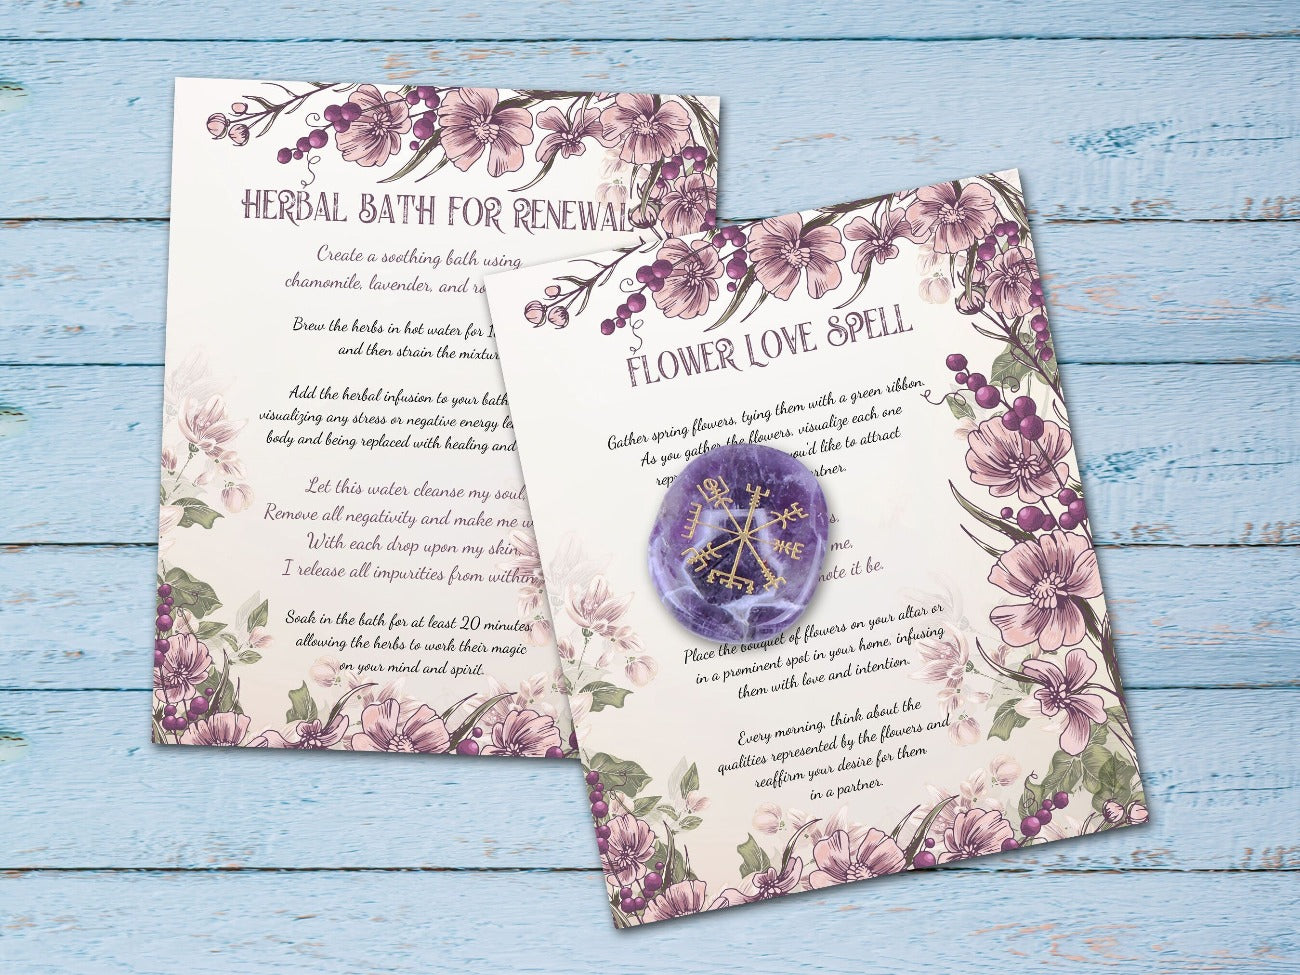 OSTARA SPELL CARDS, Herb Bath for Renewal and Flower Love Spell cards placed on a rustic blue wood background - Morgana Magick Spell